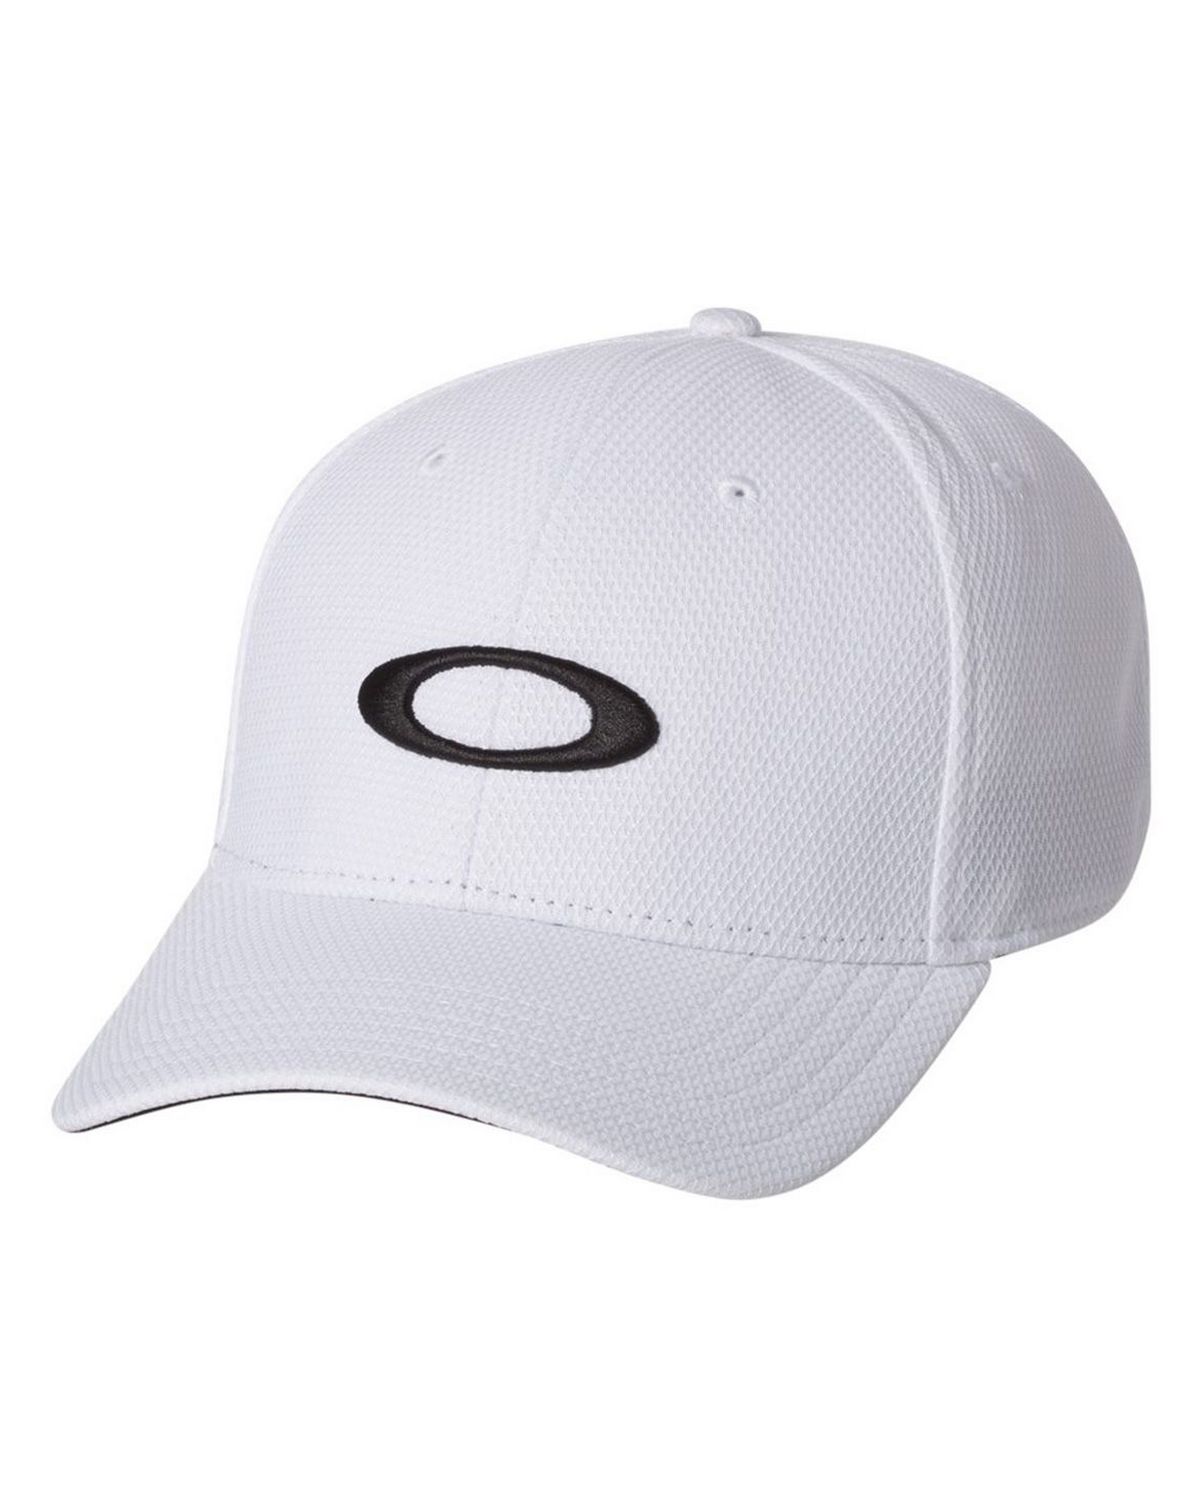 Oakley Golf Ellipse Cap - For Men - Free Shipping Available